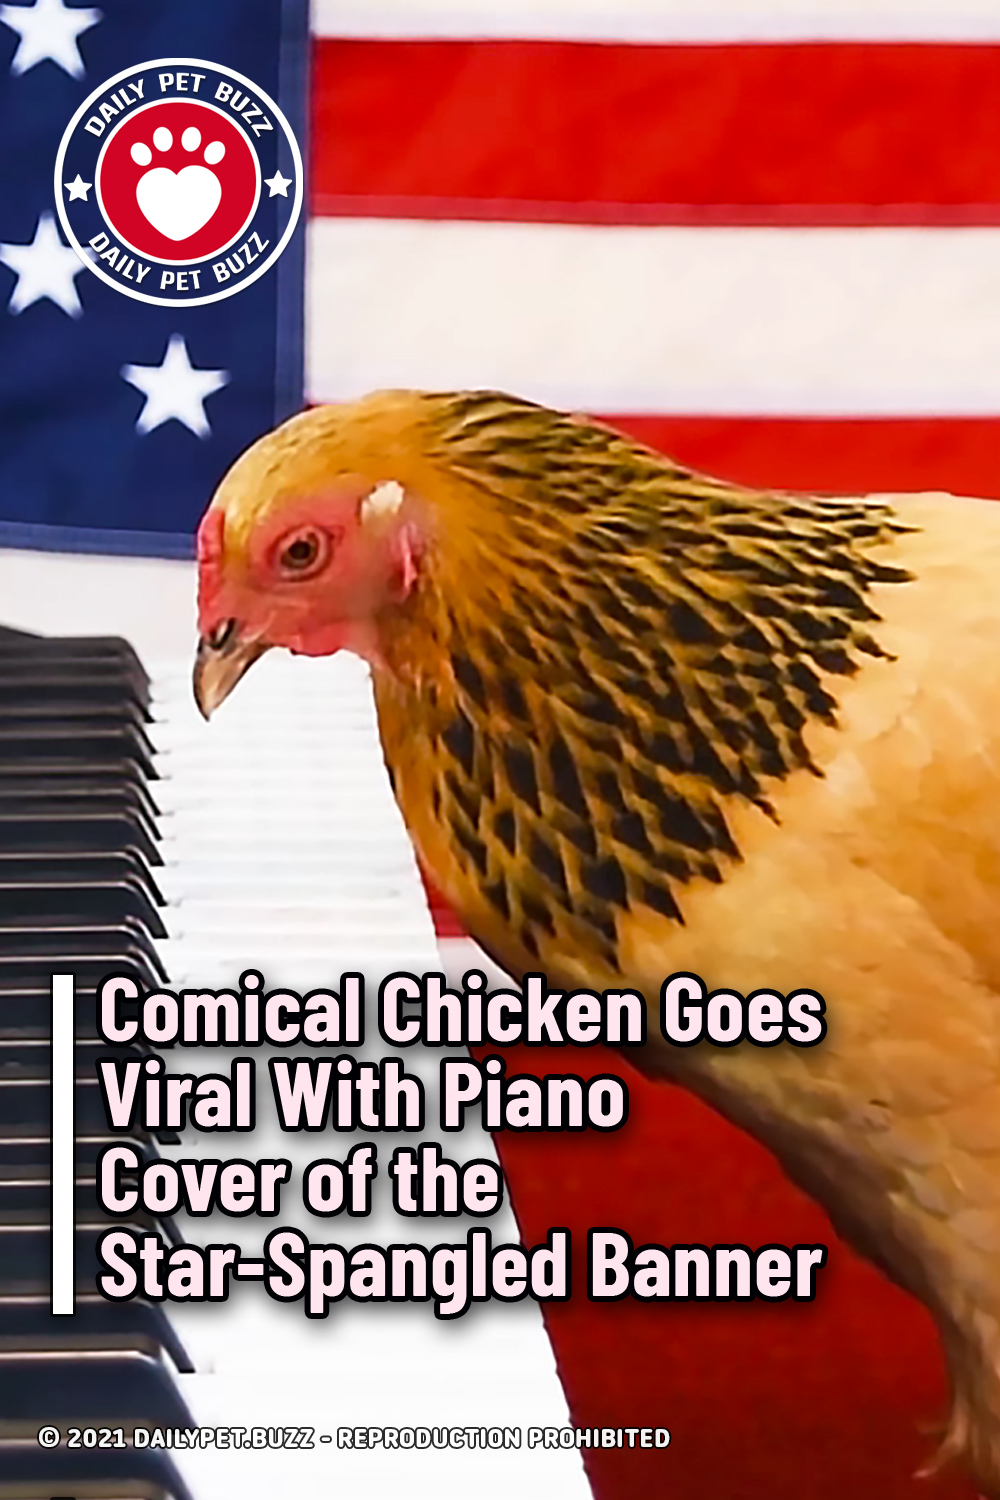 Comical Chicken Goes Viral With Piano Cover of the Star-Spangled Banner